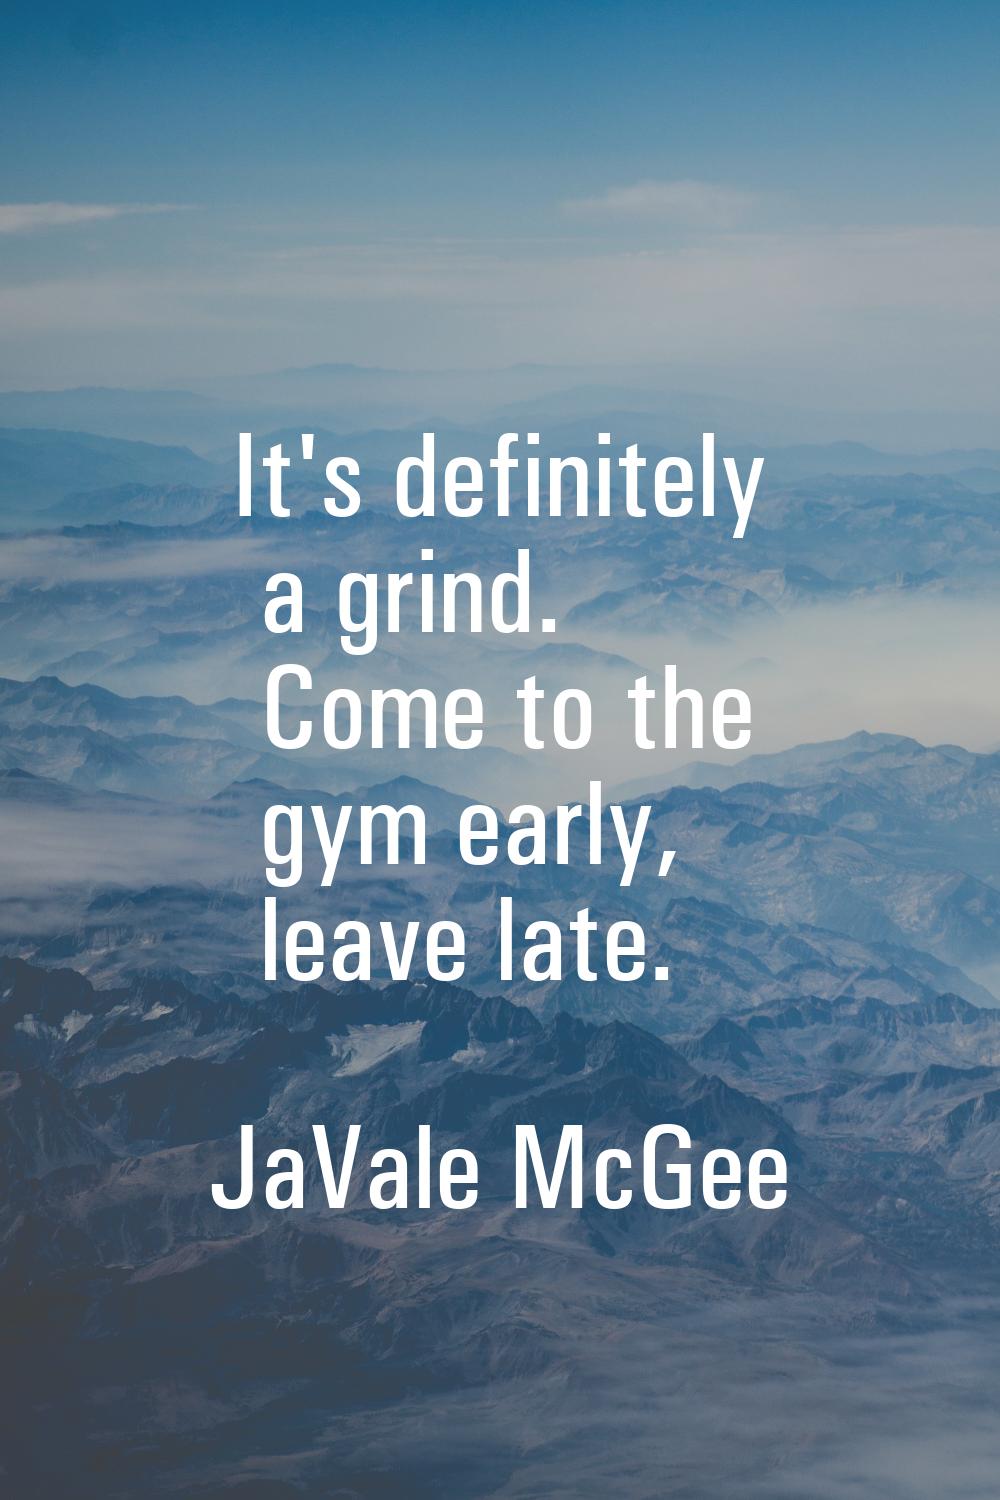 It's definitely a grind. Come to the gym early, leave late.